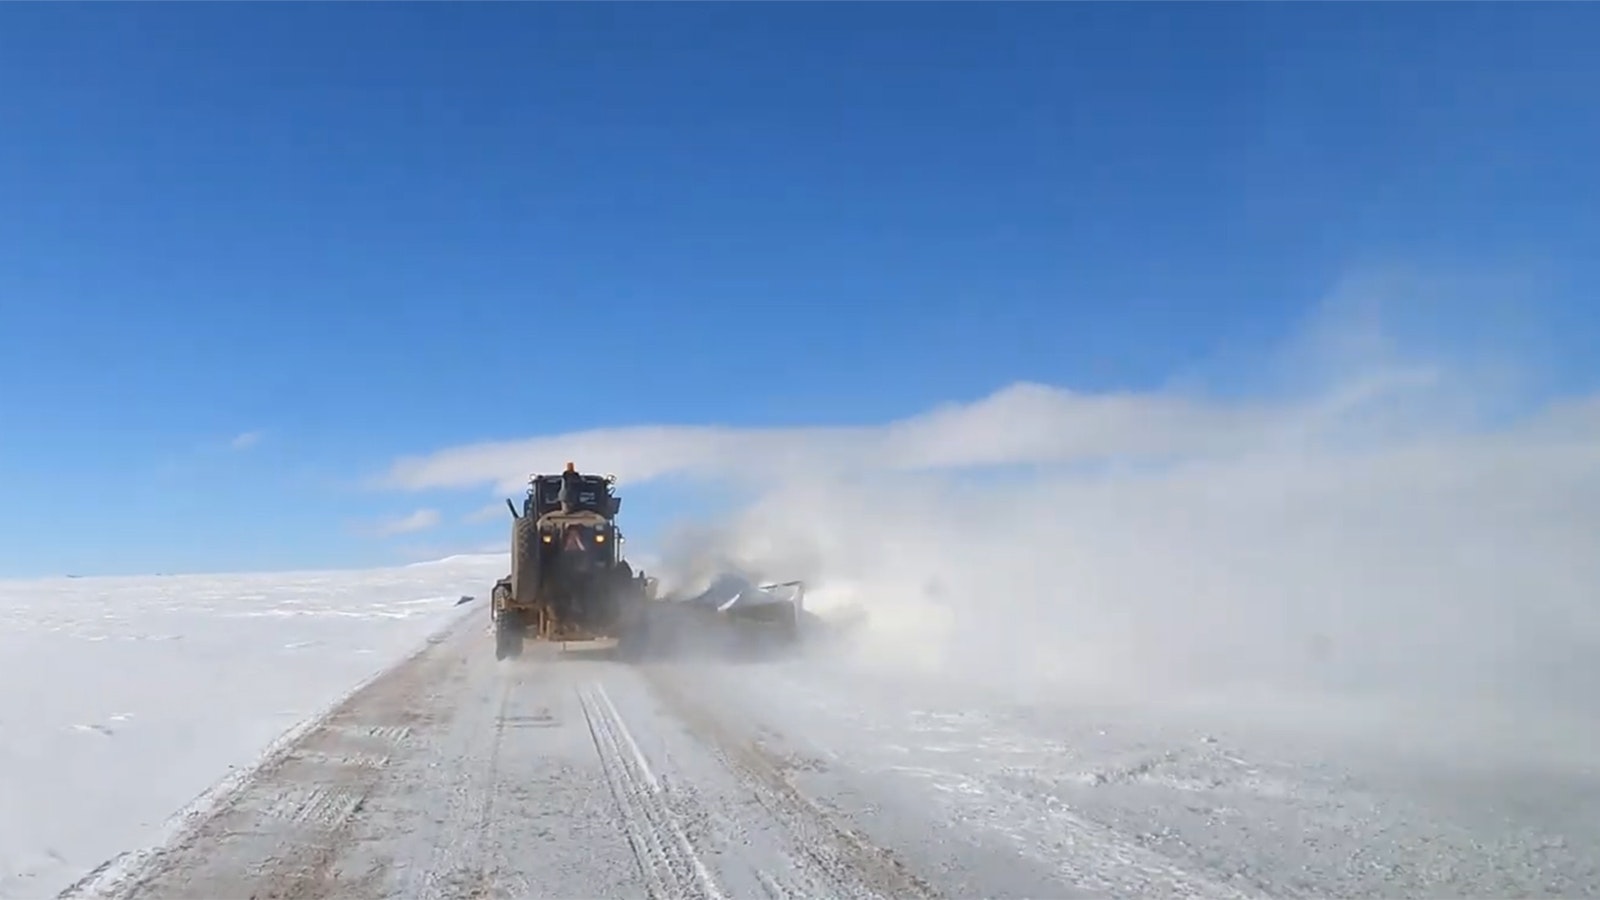 In the "Little Siberia" region of northern Albany County, Wyoming, snowplowing is done by committee, one truck after the other.